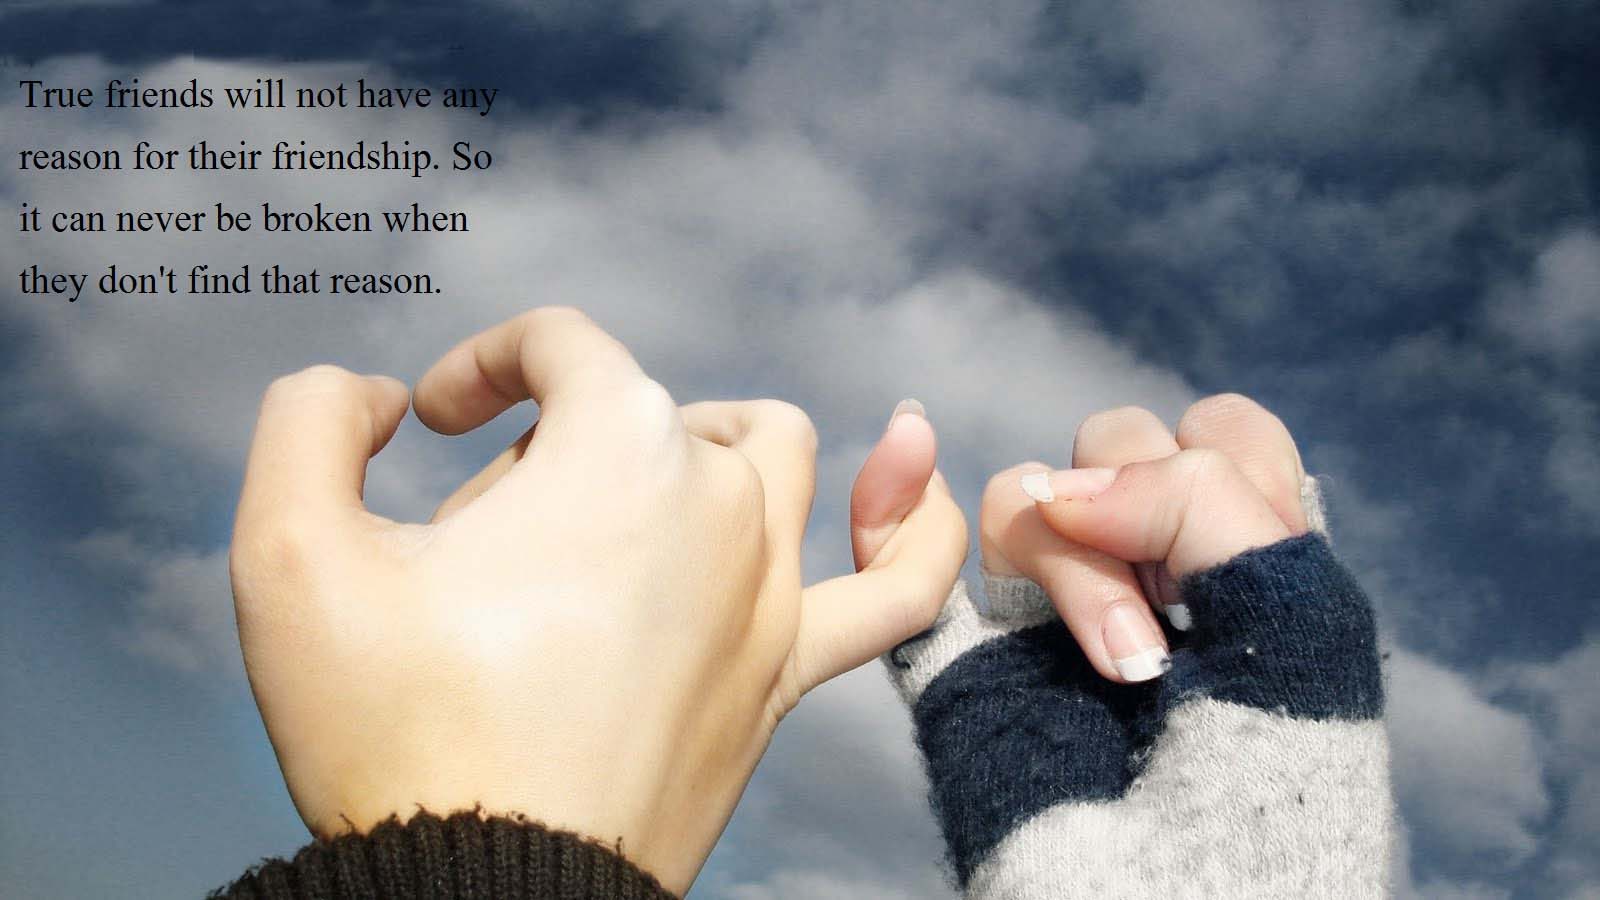 Cute Friendship Quotes With Image. Friendship wallpaper